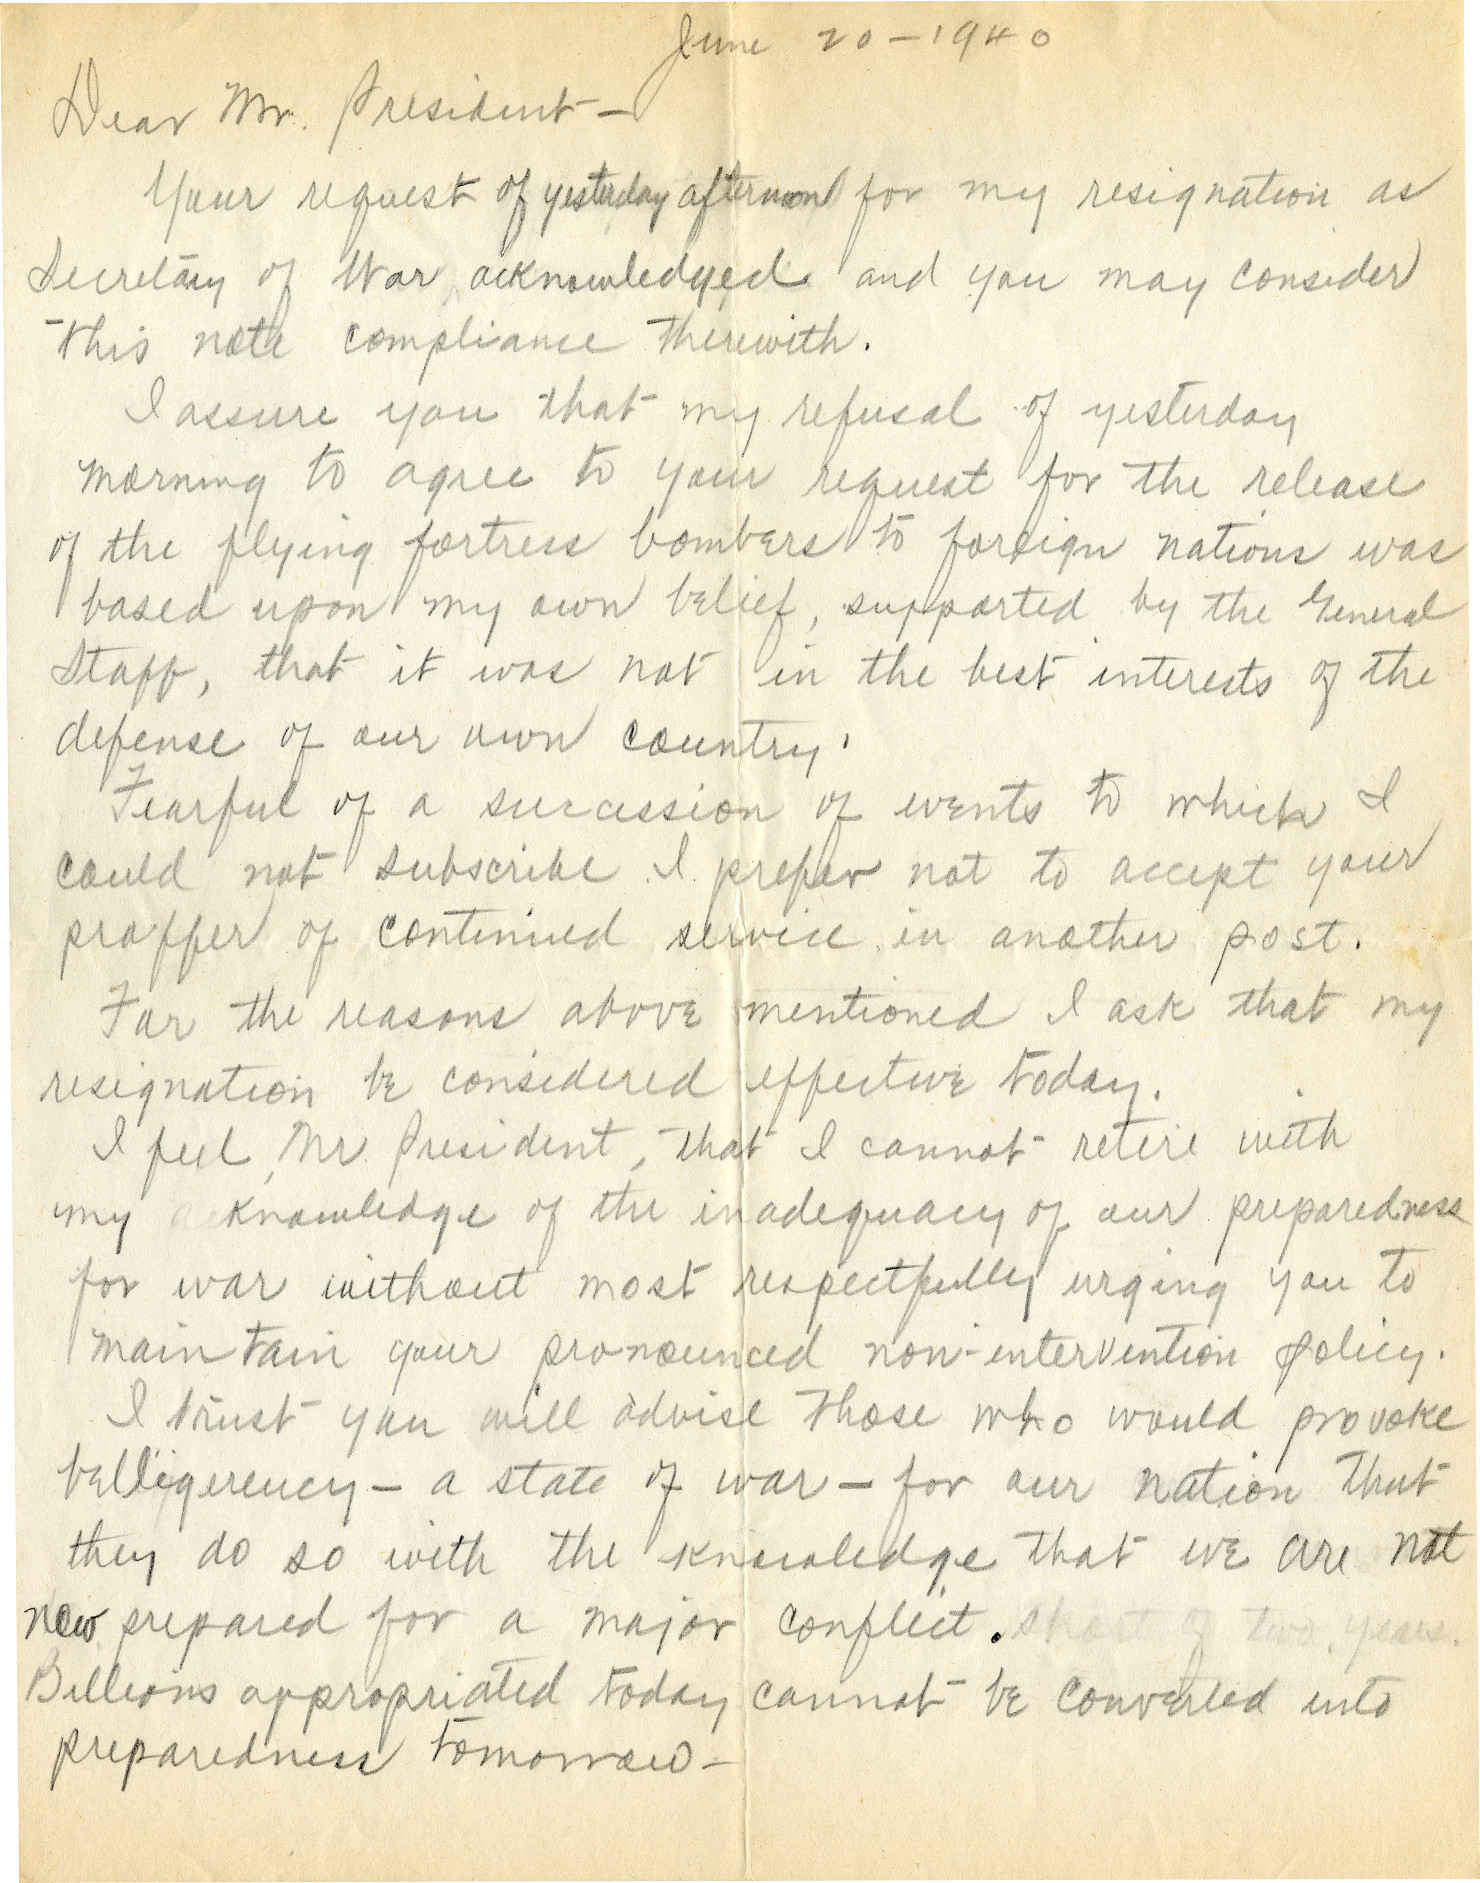 Secretary of War Woodring's Handwritten Draft of His Controversial Resignation Letter to FDR